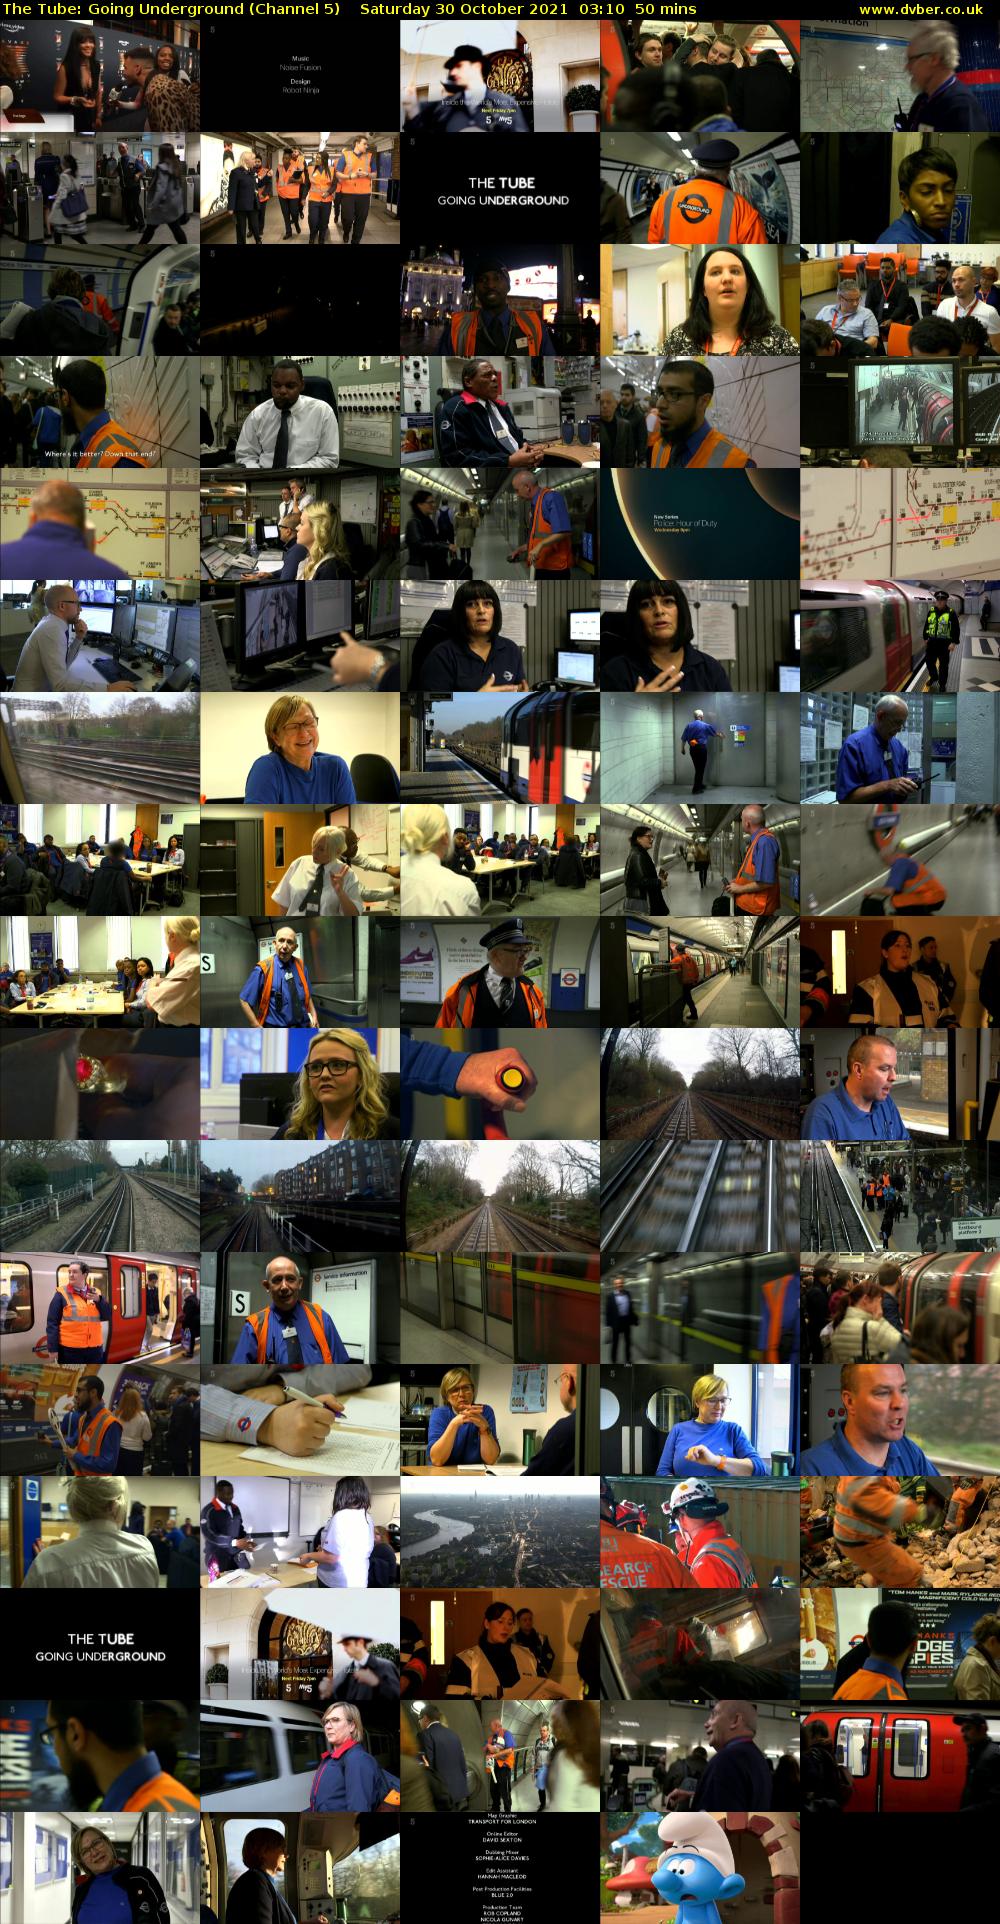 The Tube: Going Underground (Channel 5) Saturday 30 October 2021 03:10 - 04:00